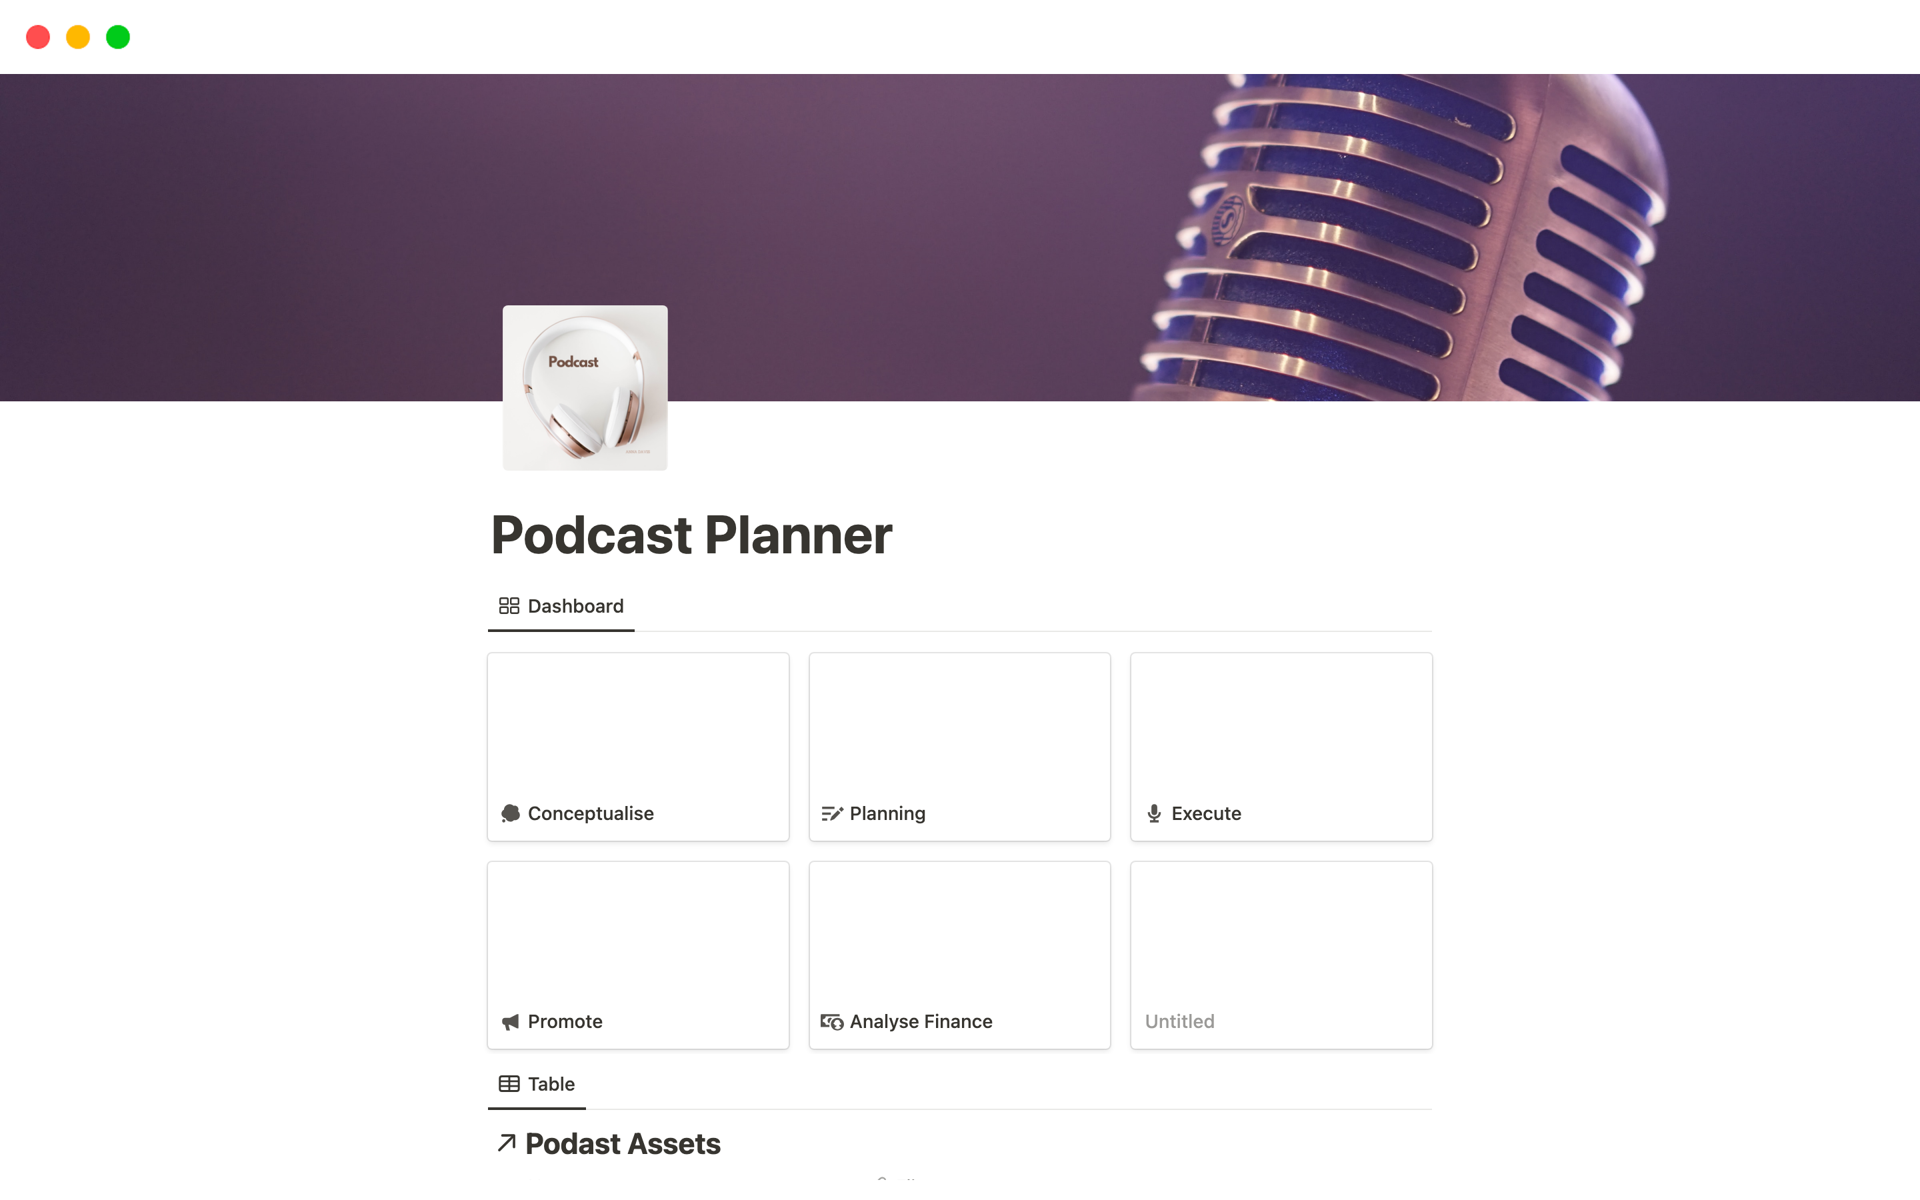 This template takes you from conceptualising your podcast to recording and promoting it in a step by step process.